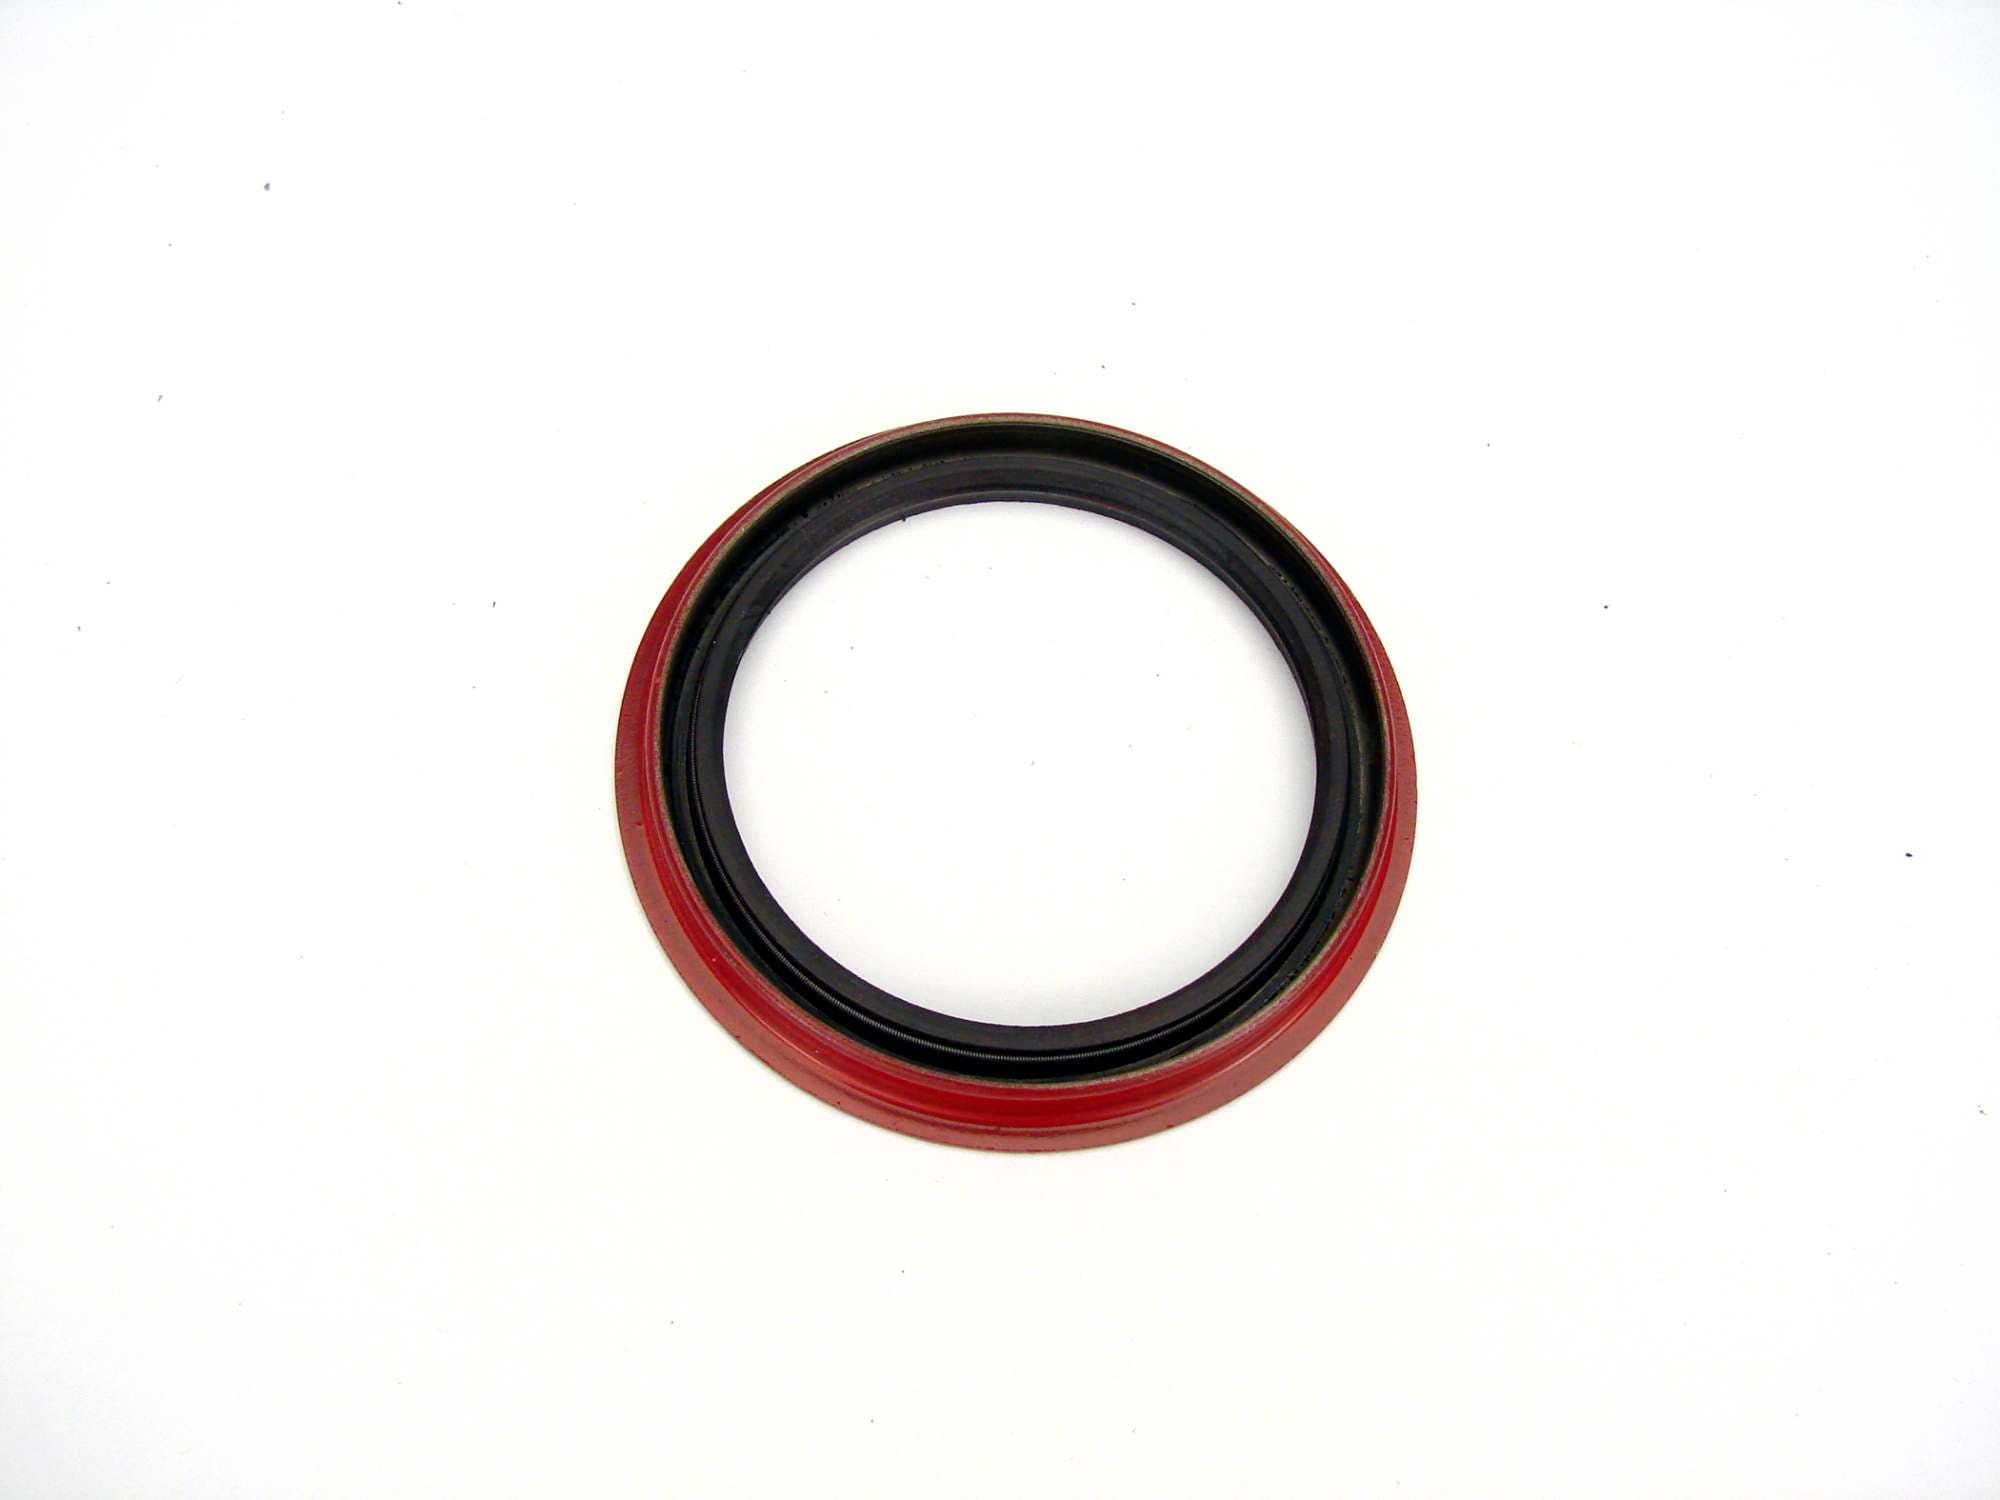 Competition Cams 6100LS Magnum Belt Drive Systems Lower Replacement Oil Seal